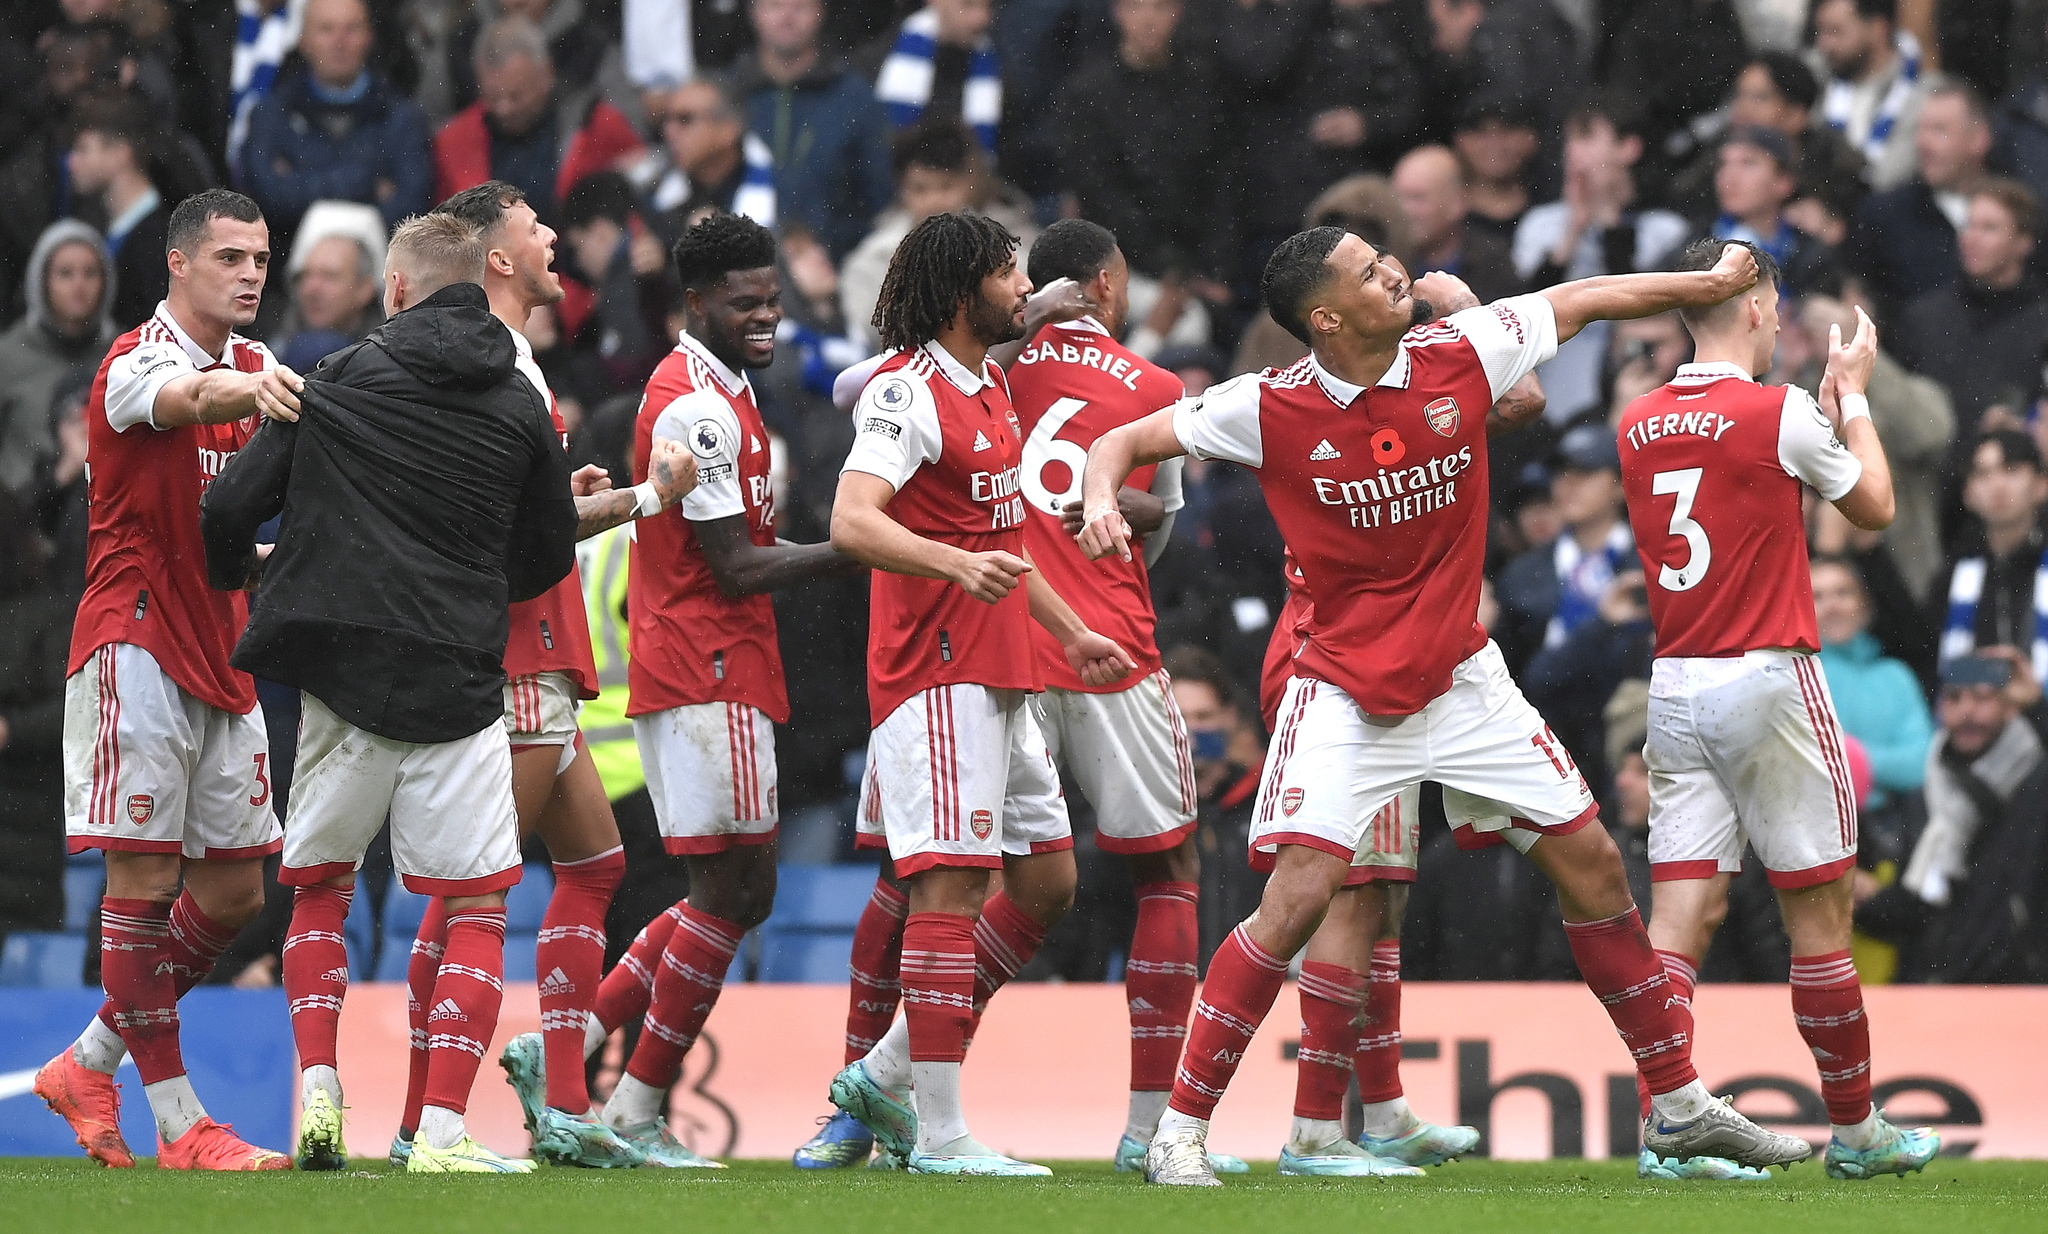 Arsenal celebrate a win away at Chelsea.